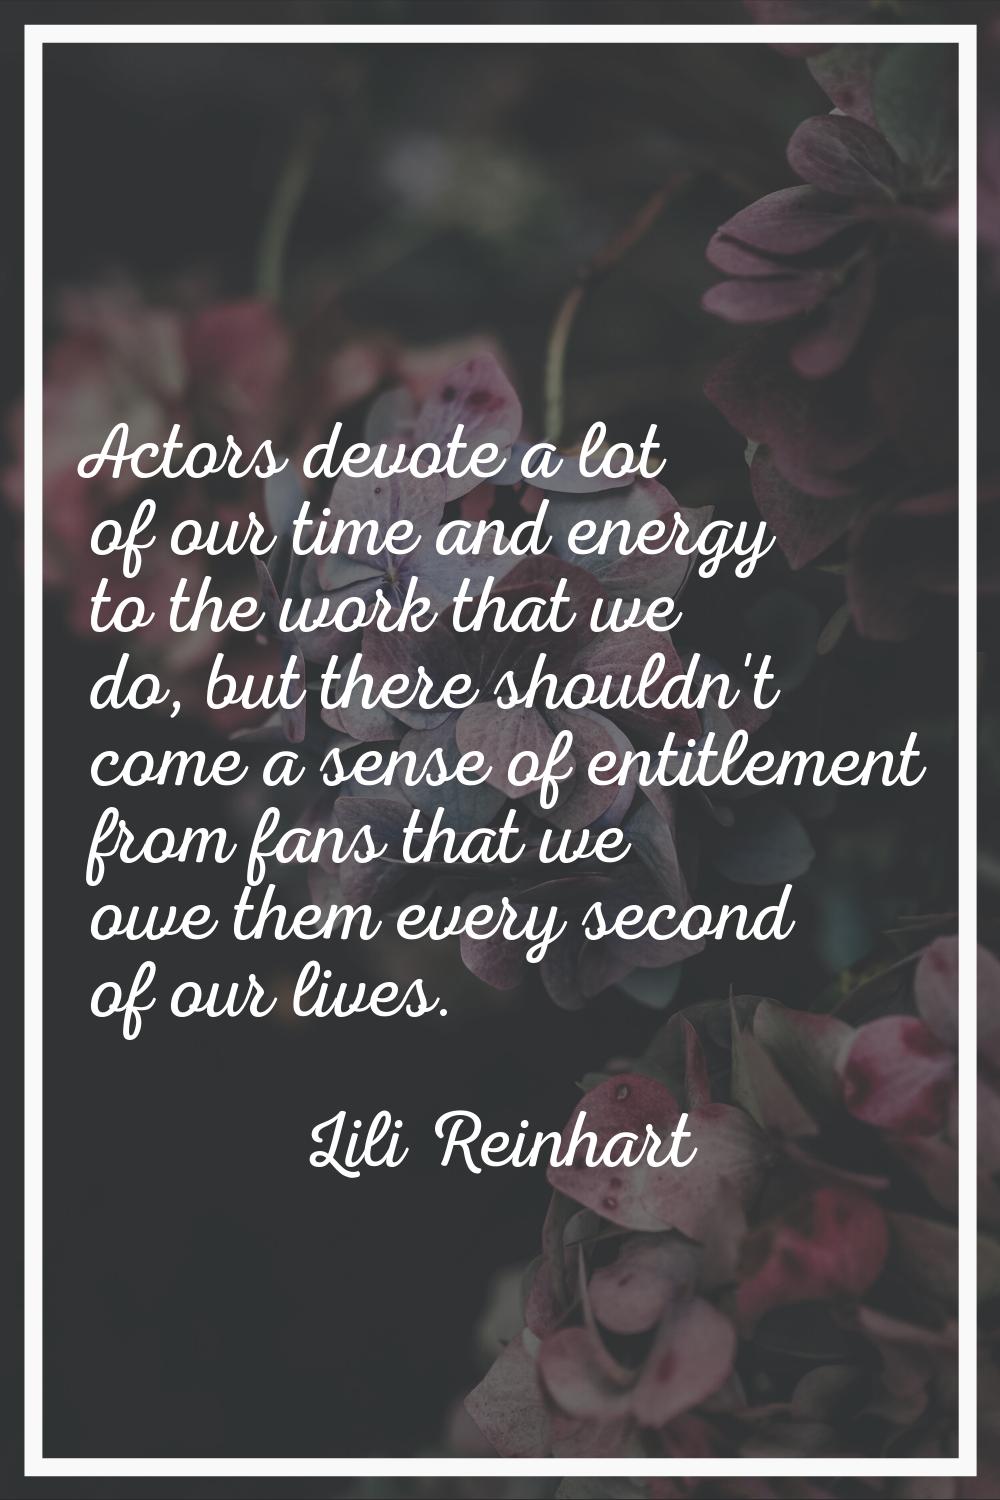 Actors devote a lot of our time and energy to the work that we do, but there shouldn't come a sense